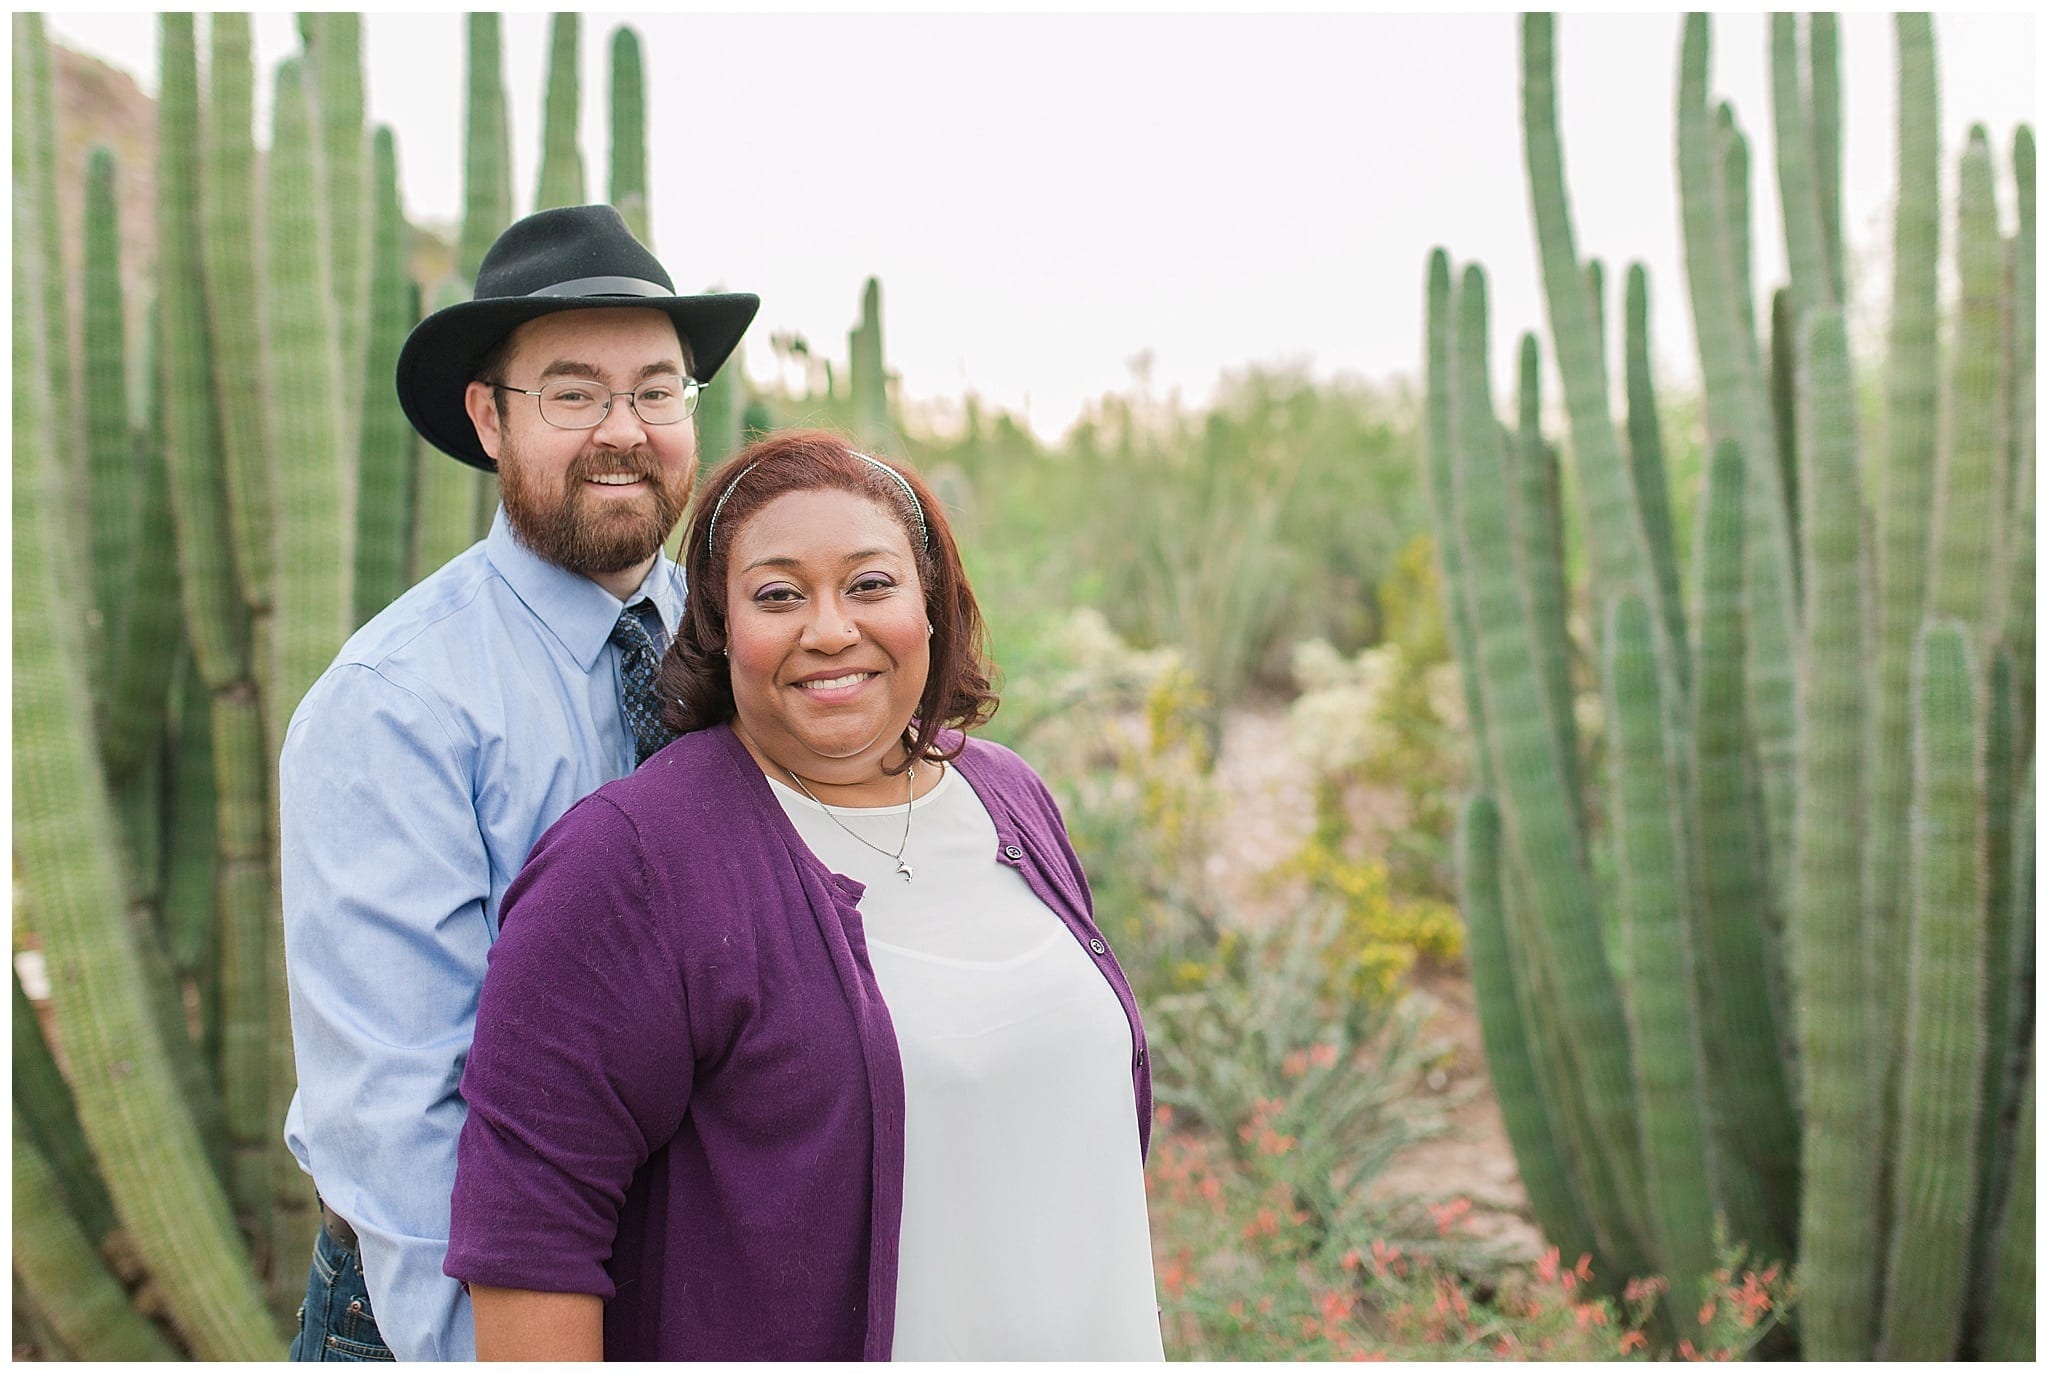 couple smiling with cactus behind them